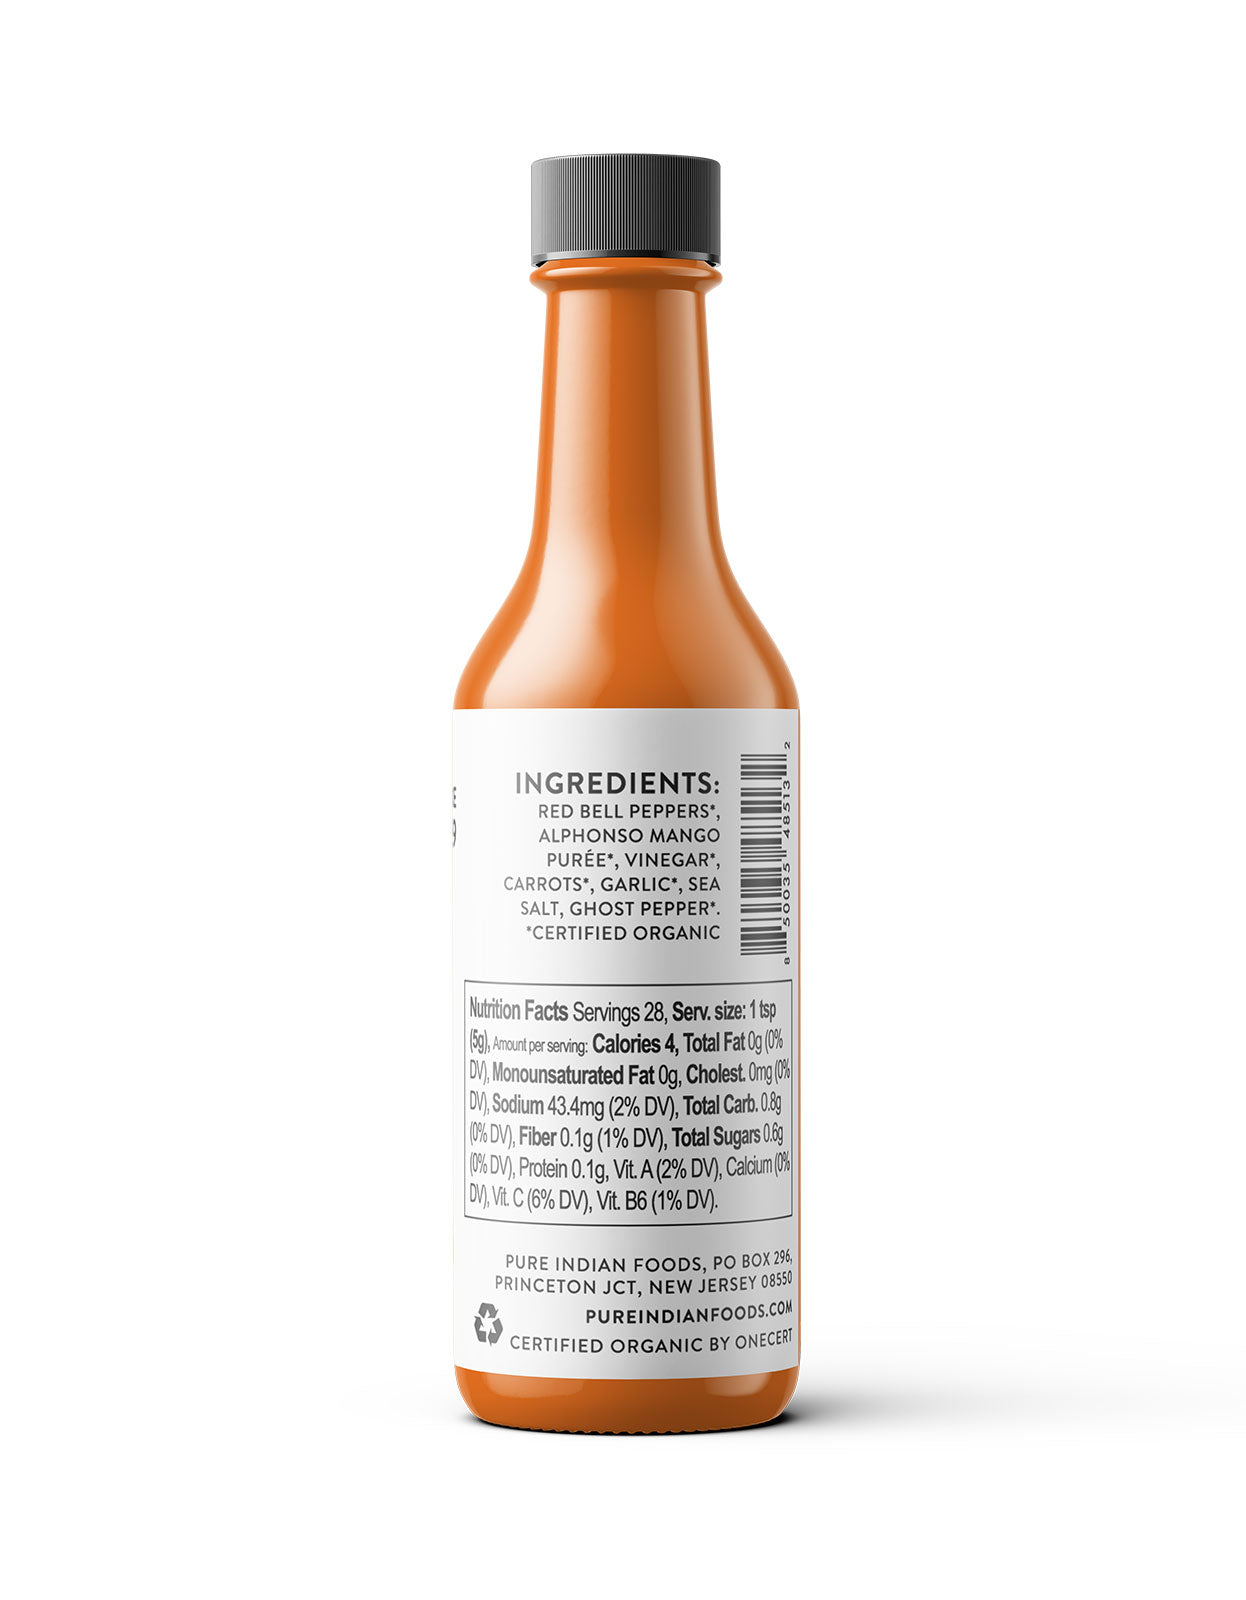 Ingredients label on a bottle of Pure Indian Foods KICK Hot Sauce, an organic Mango hot sauce made with red bell peppers, aphonso mango puree, vinegar, carrots, garlic, seal salt, and smoked Ghost pepper